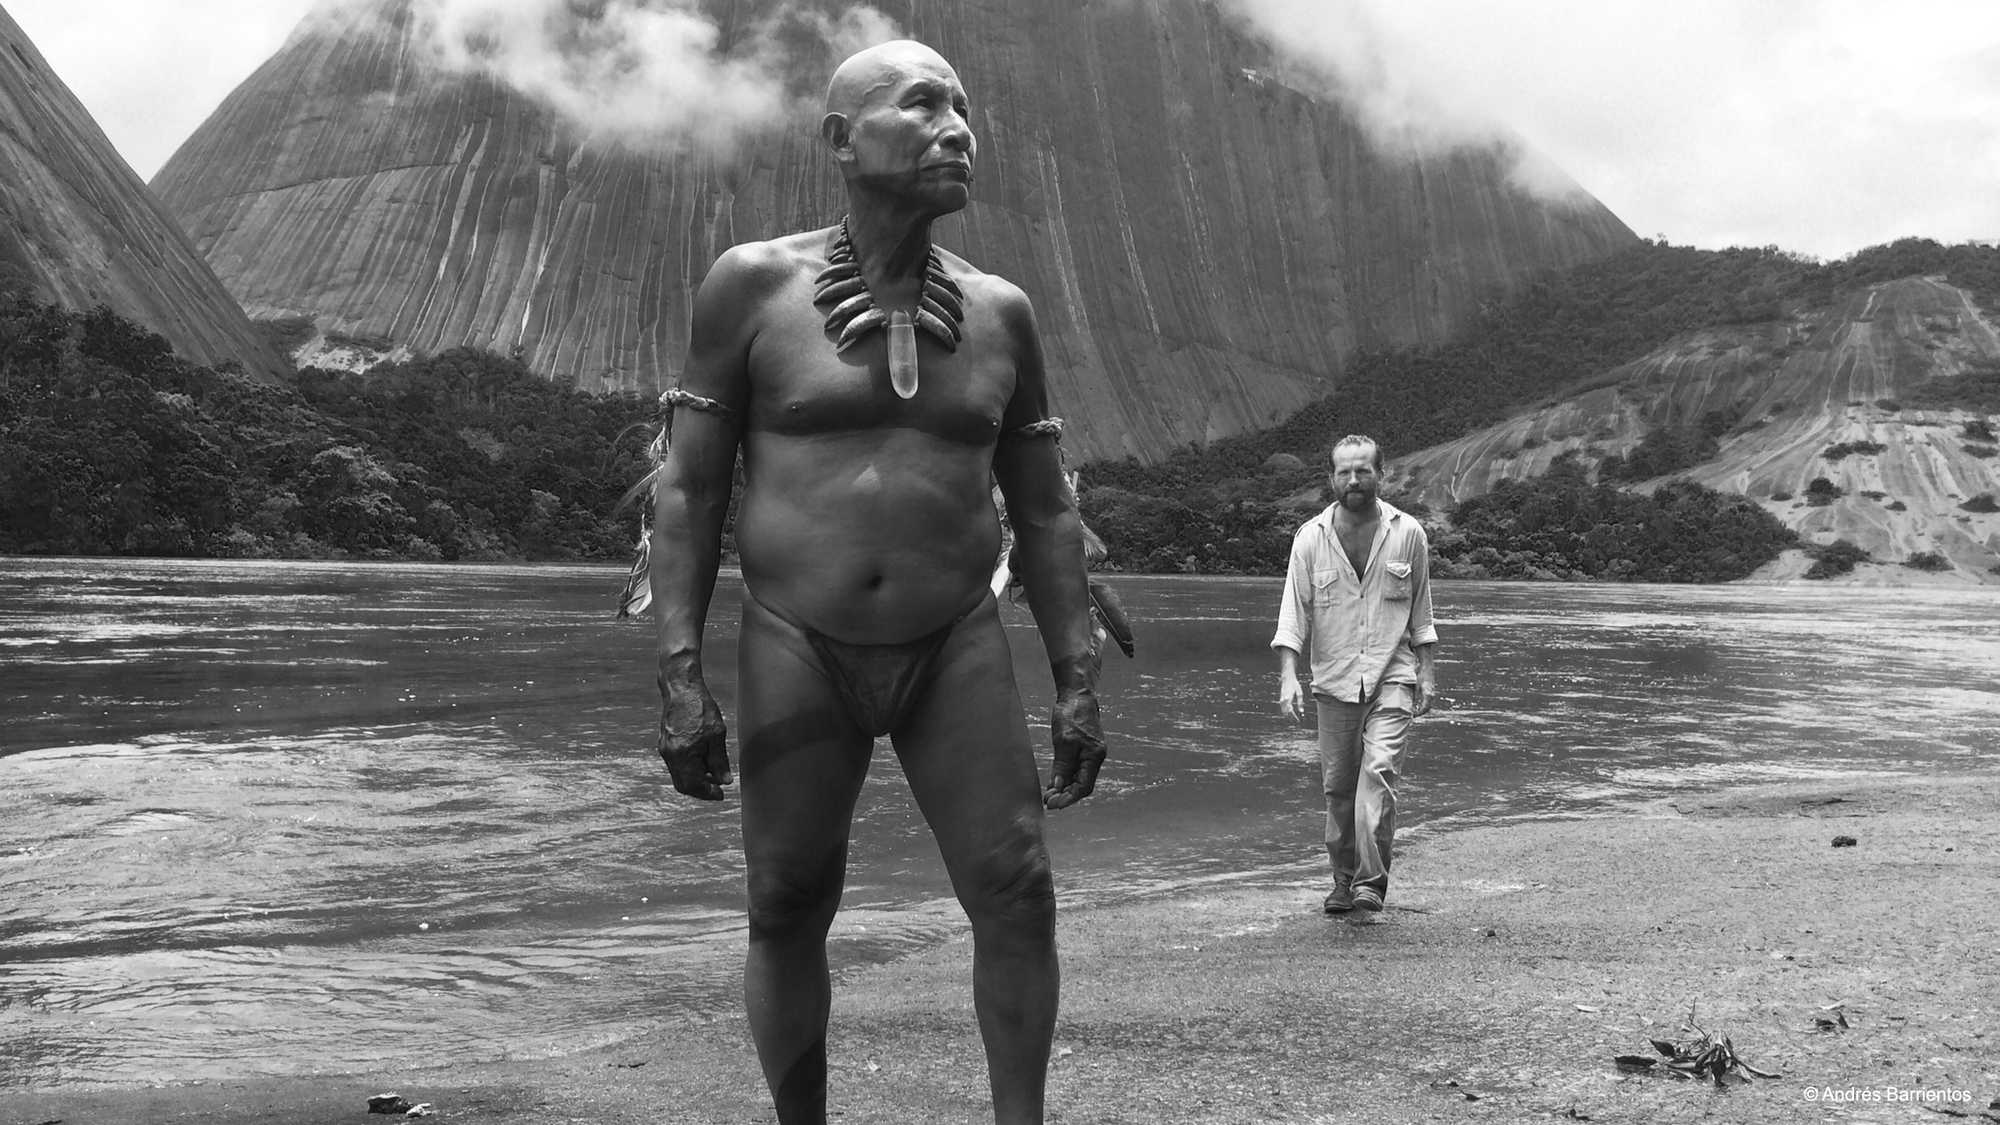 embrace_of_the_serpent_key_still_andres_barrientos-credit-0-2000-0-1125-crop.jpg